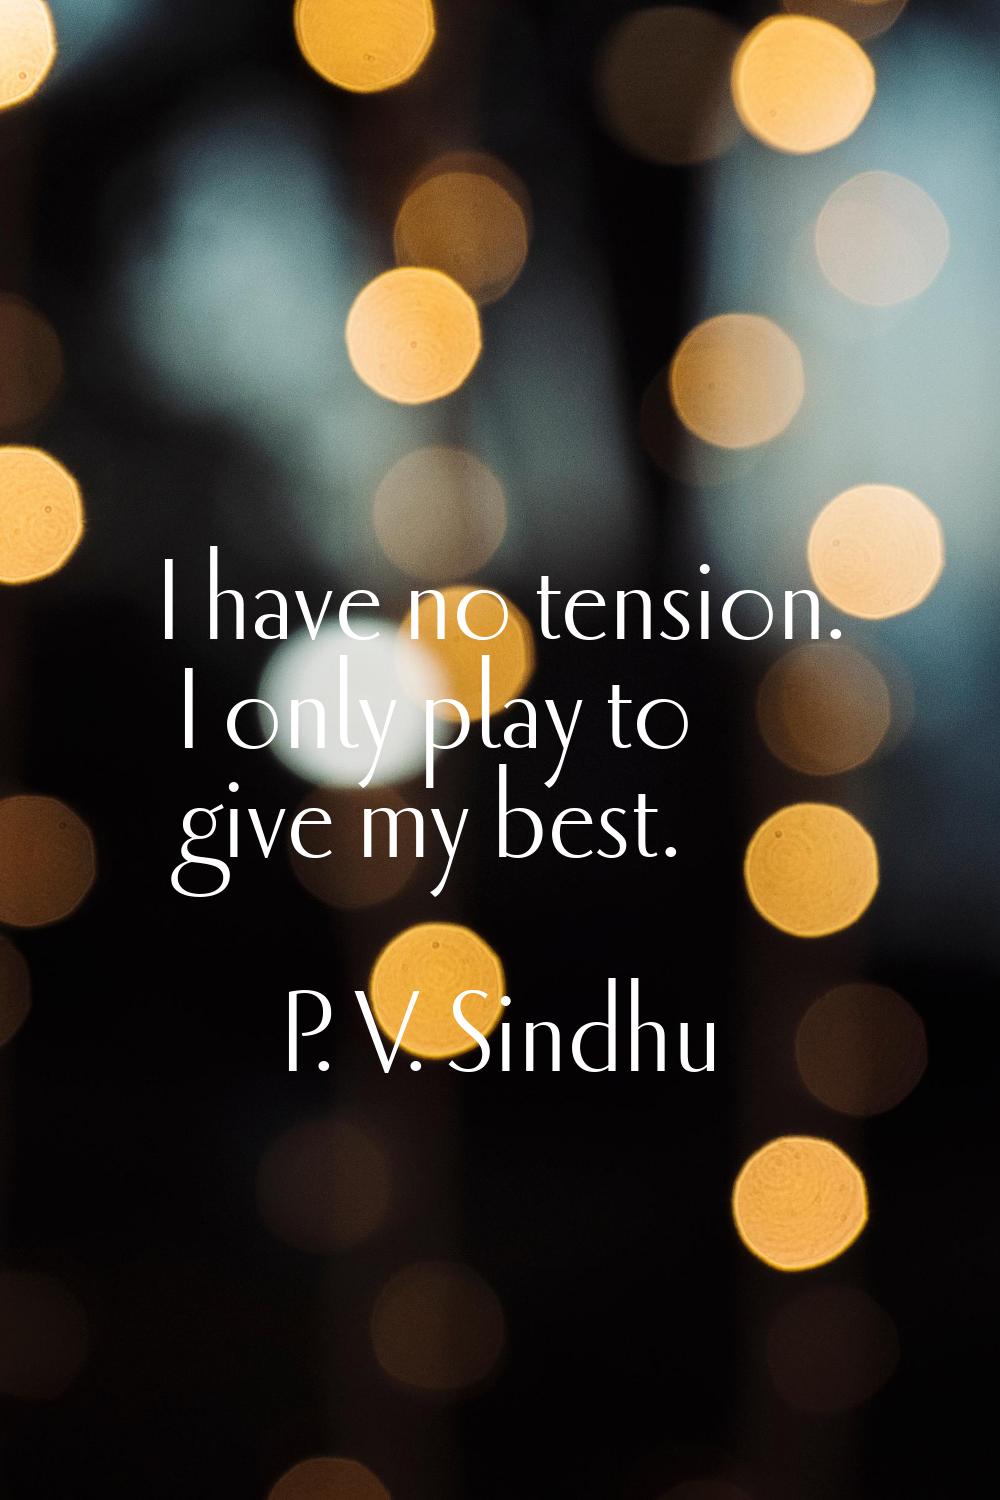 I have no tension. I only play to give my best.